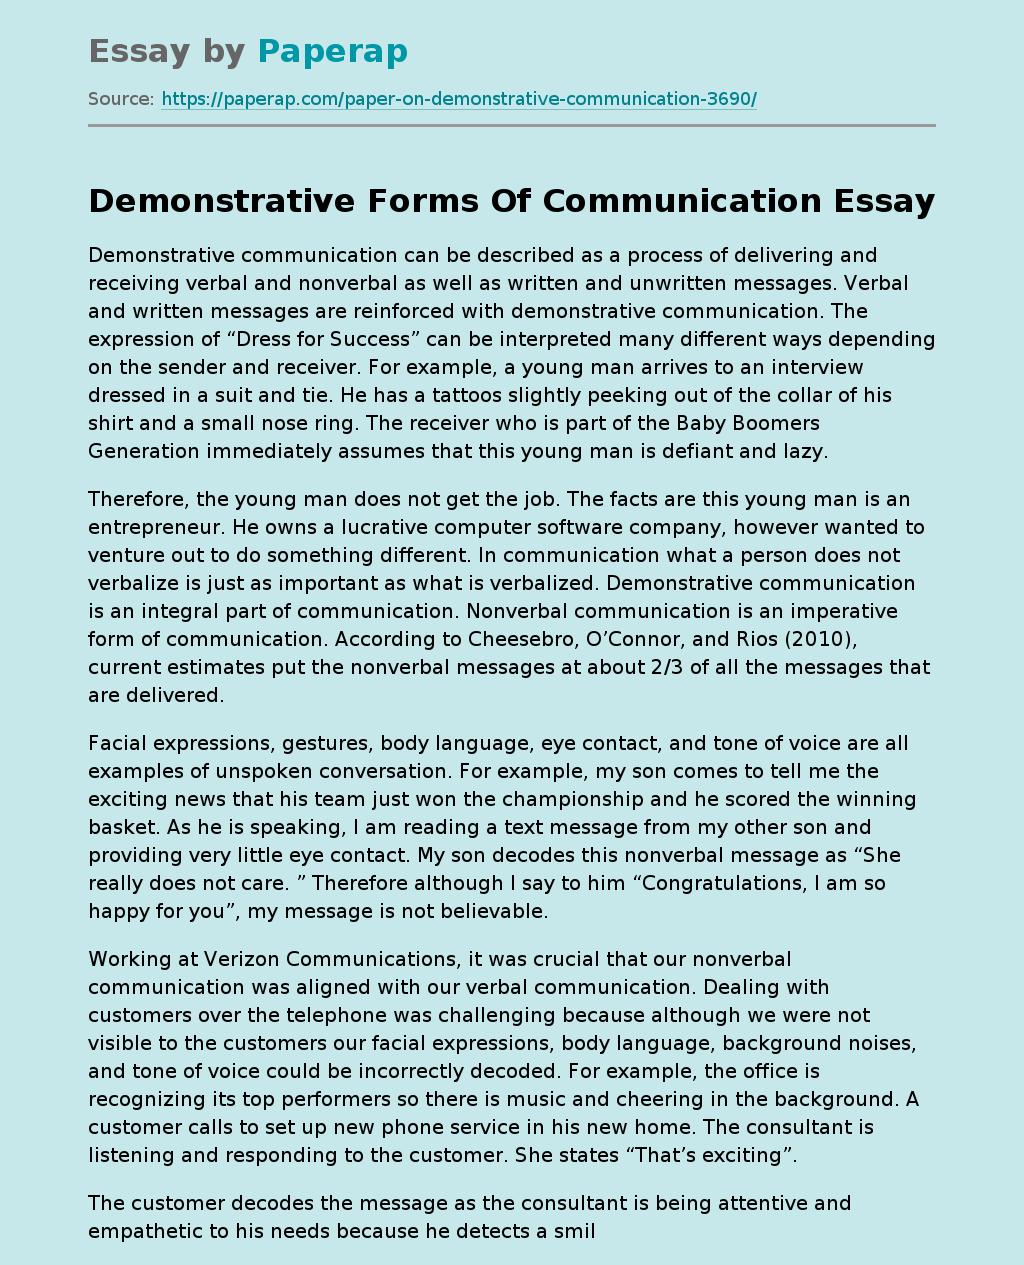 Demonstrative Forms Of Communication